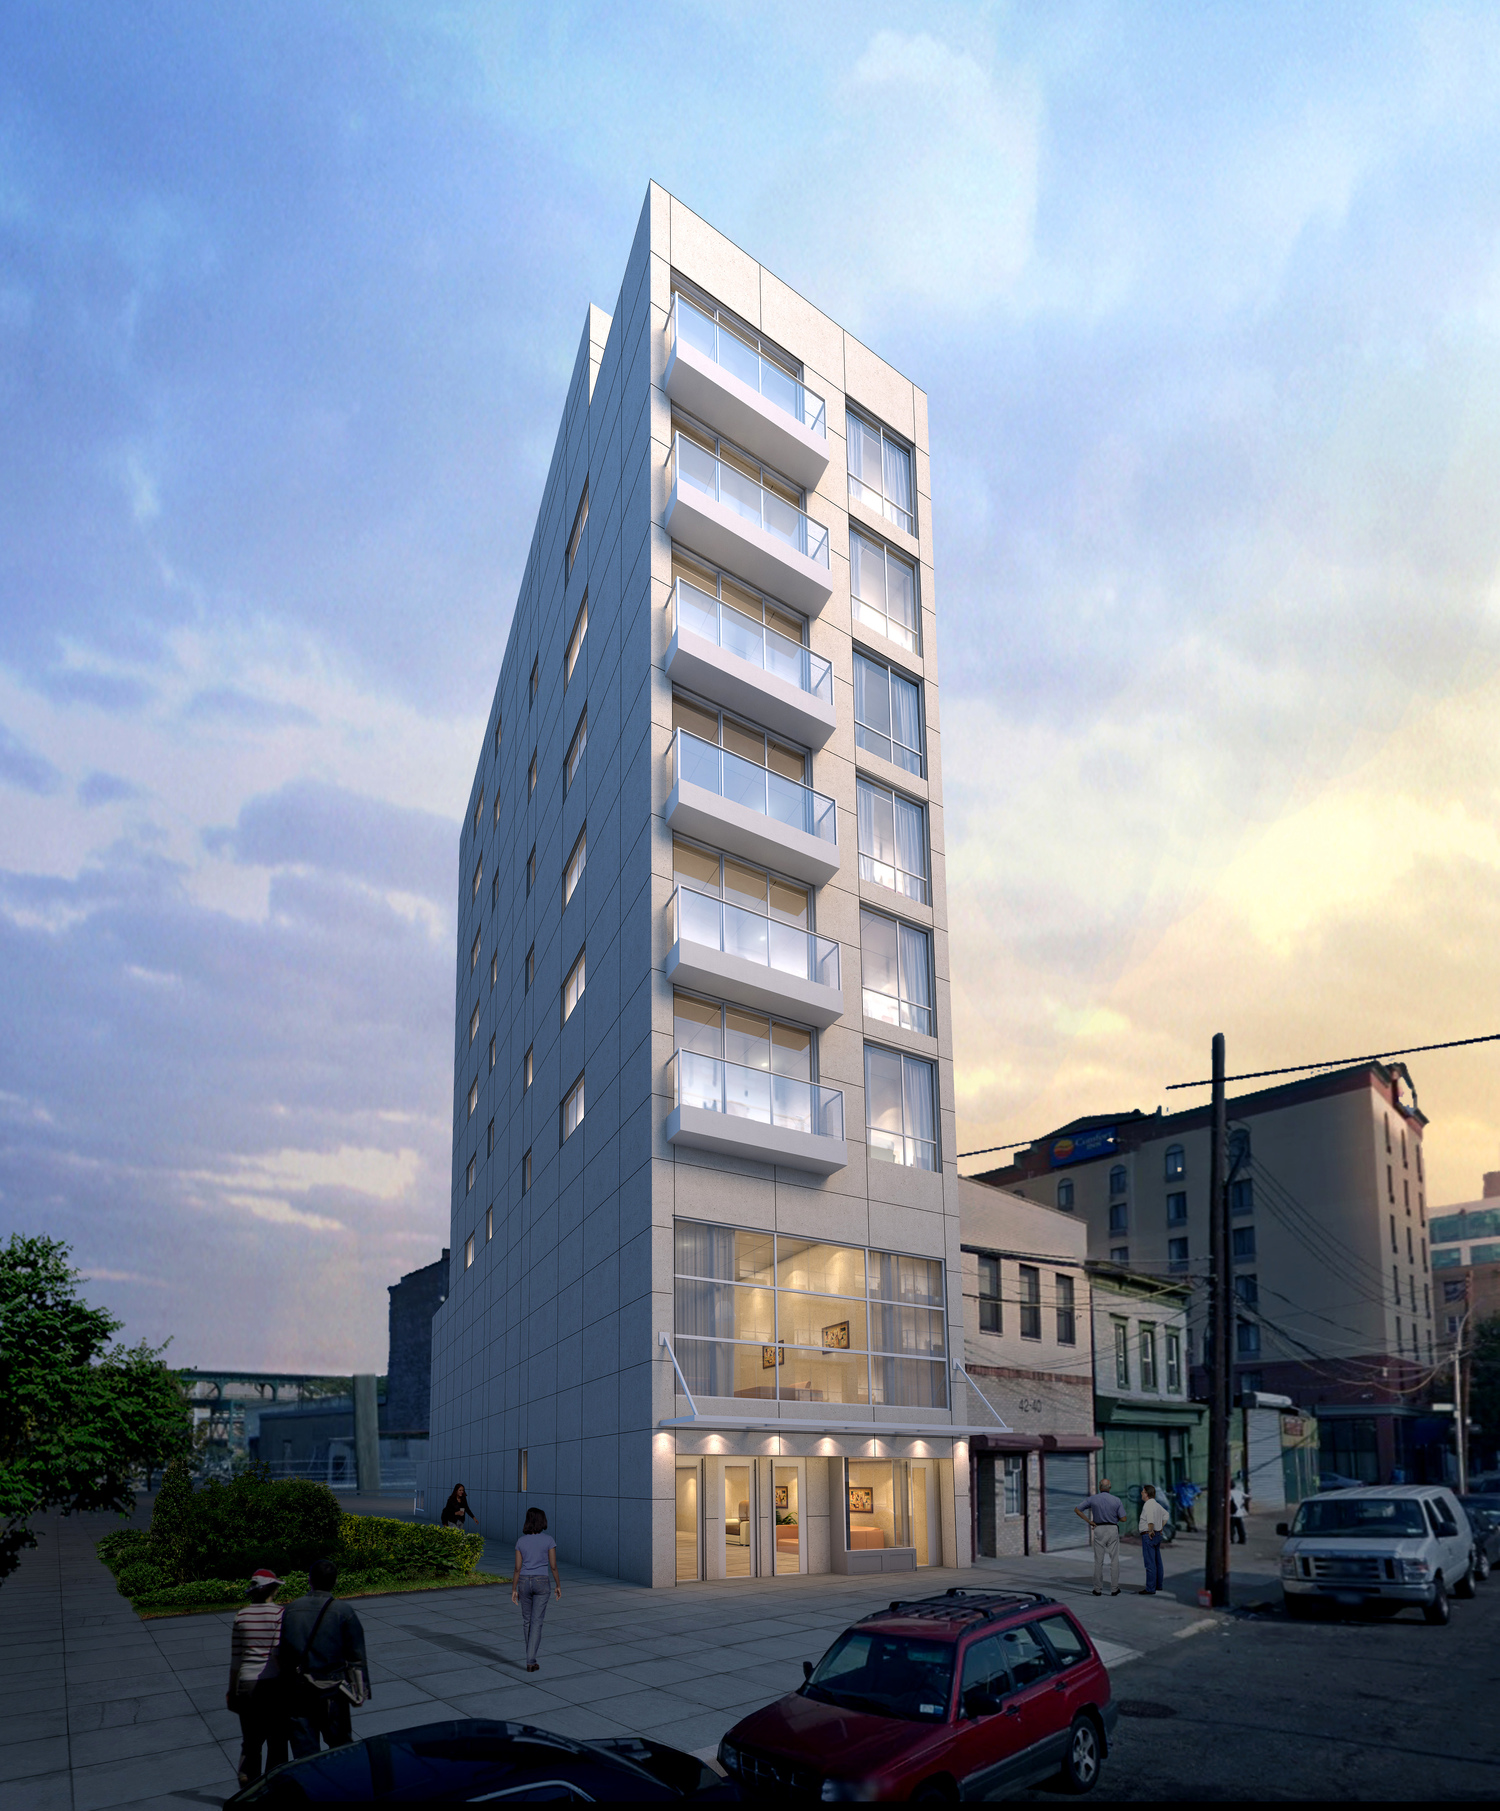 42-44 Crescent Street, rendering by Architects' Studio